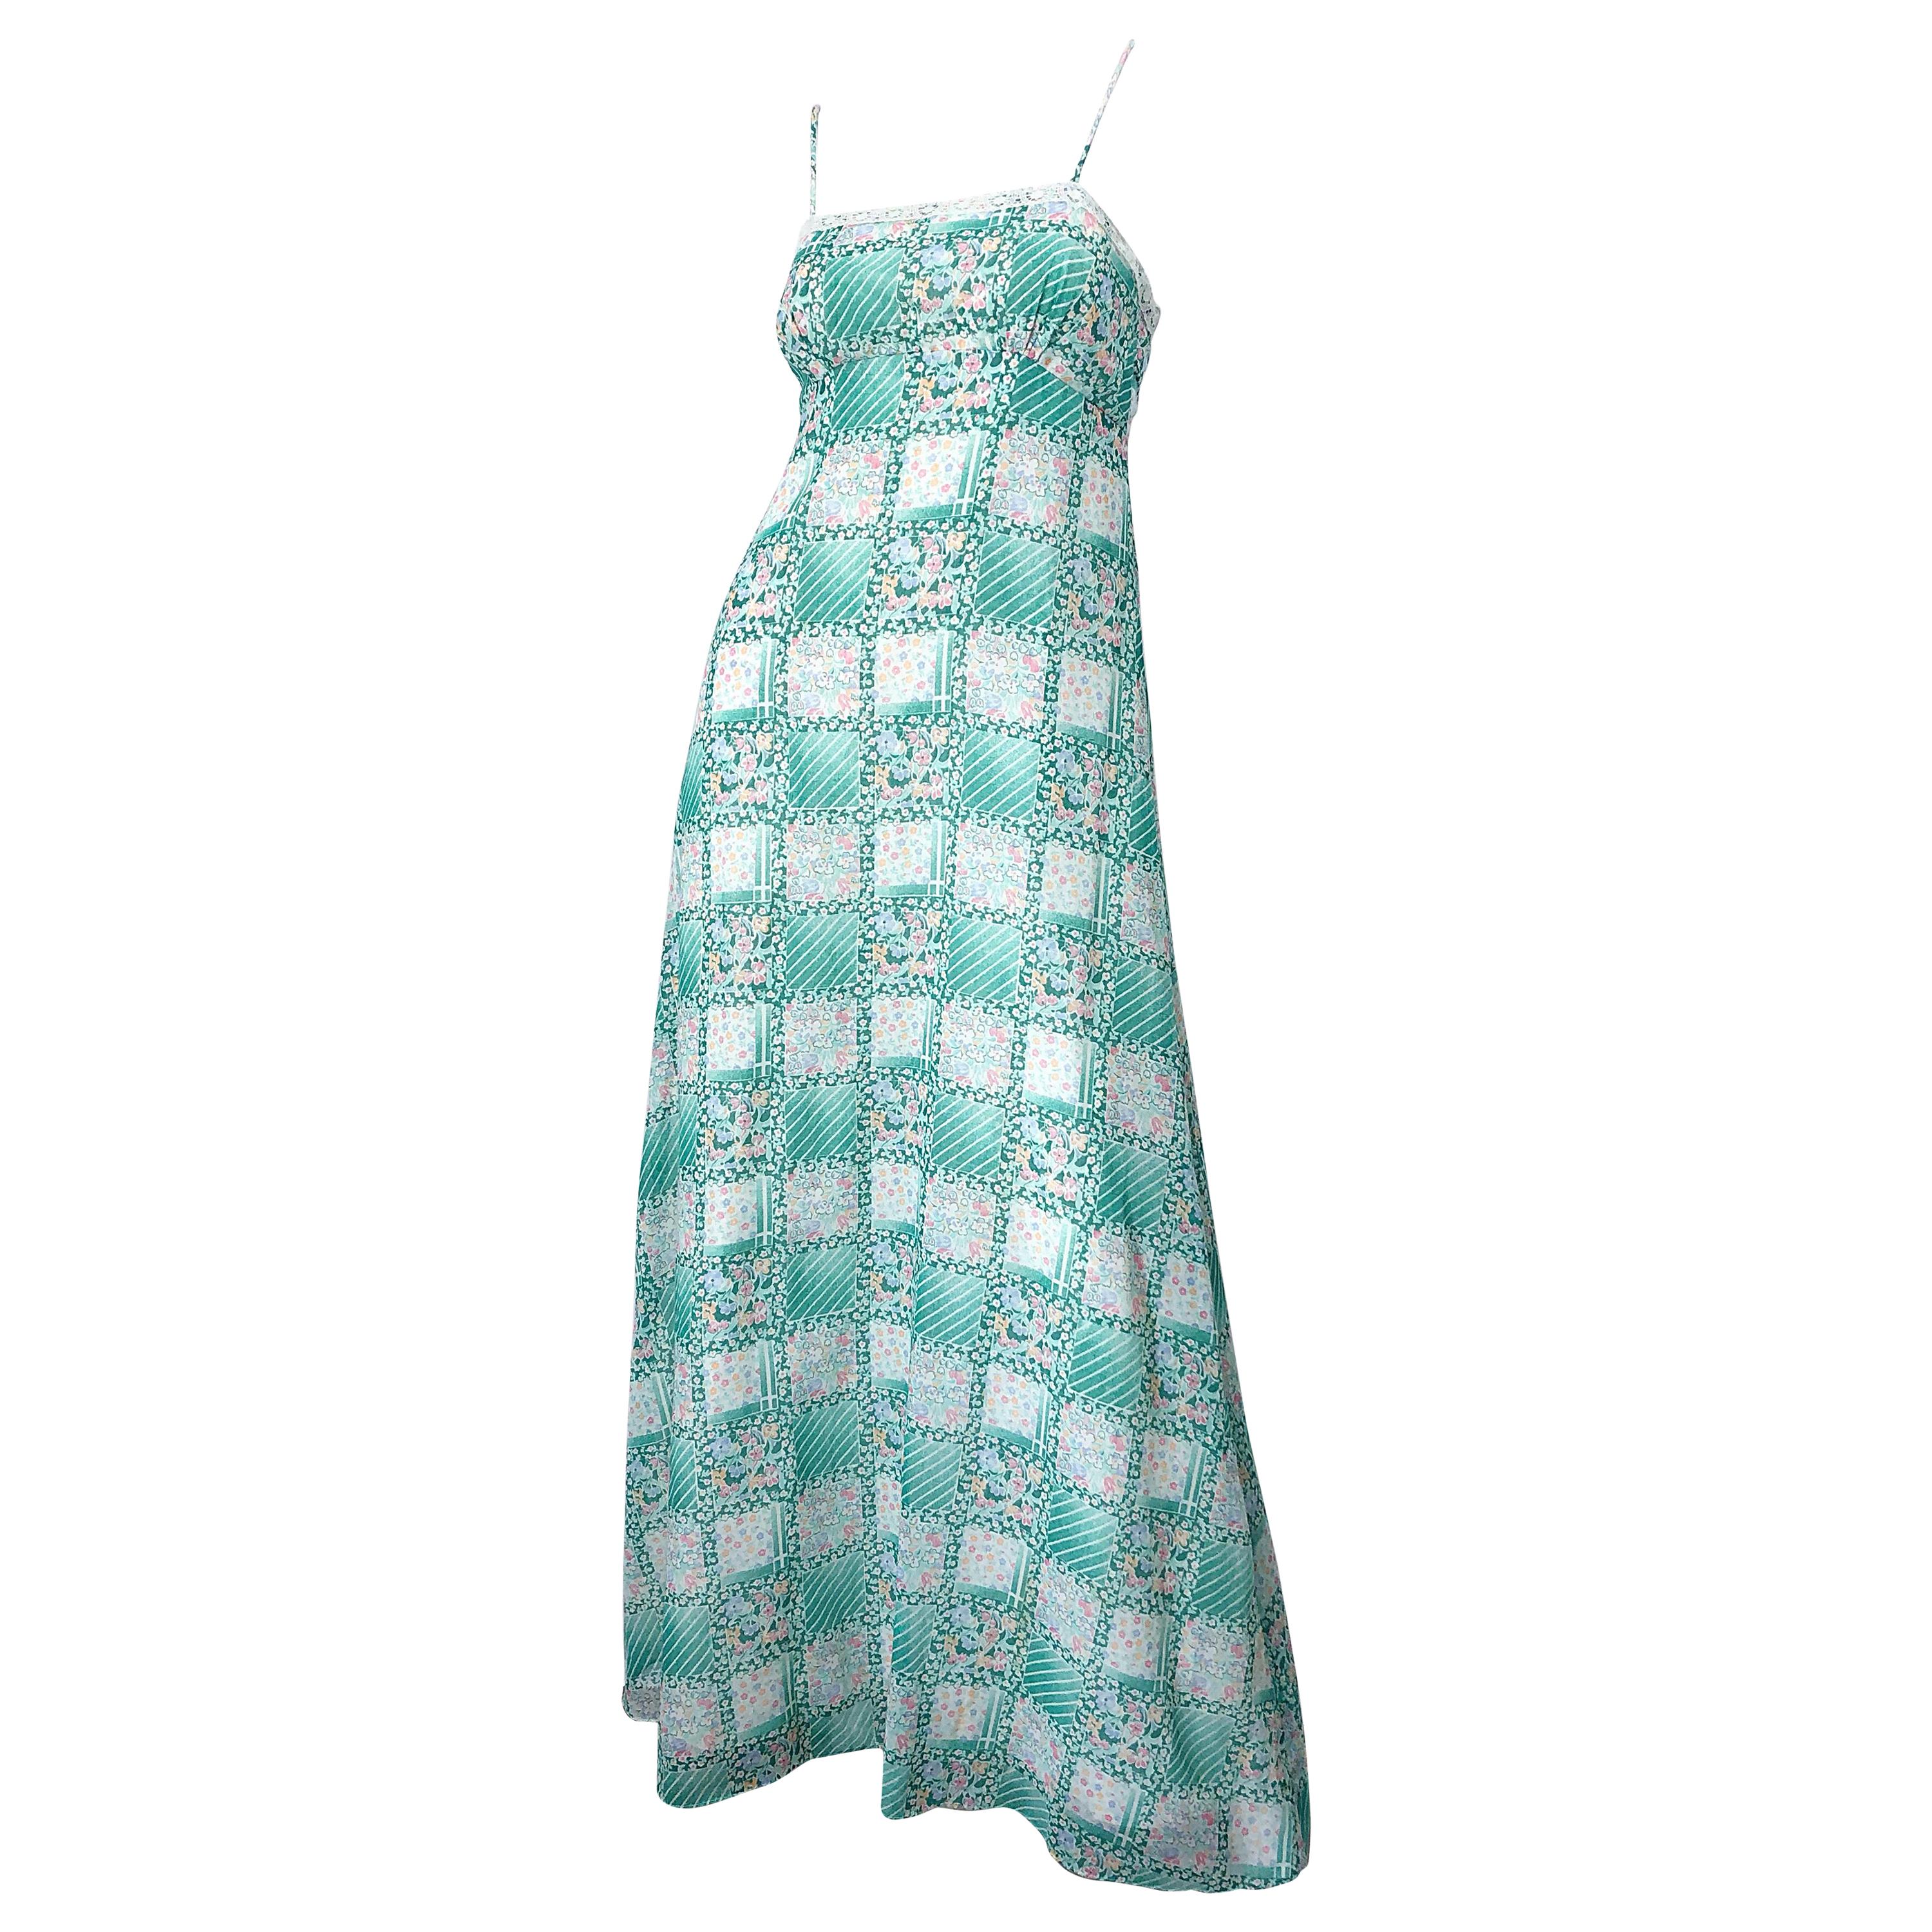 1970s Teal Green Blue Pink Flower Printed Cotton + Lace Vintage 70s Maxi Dress For Sale